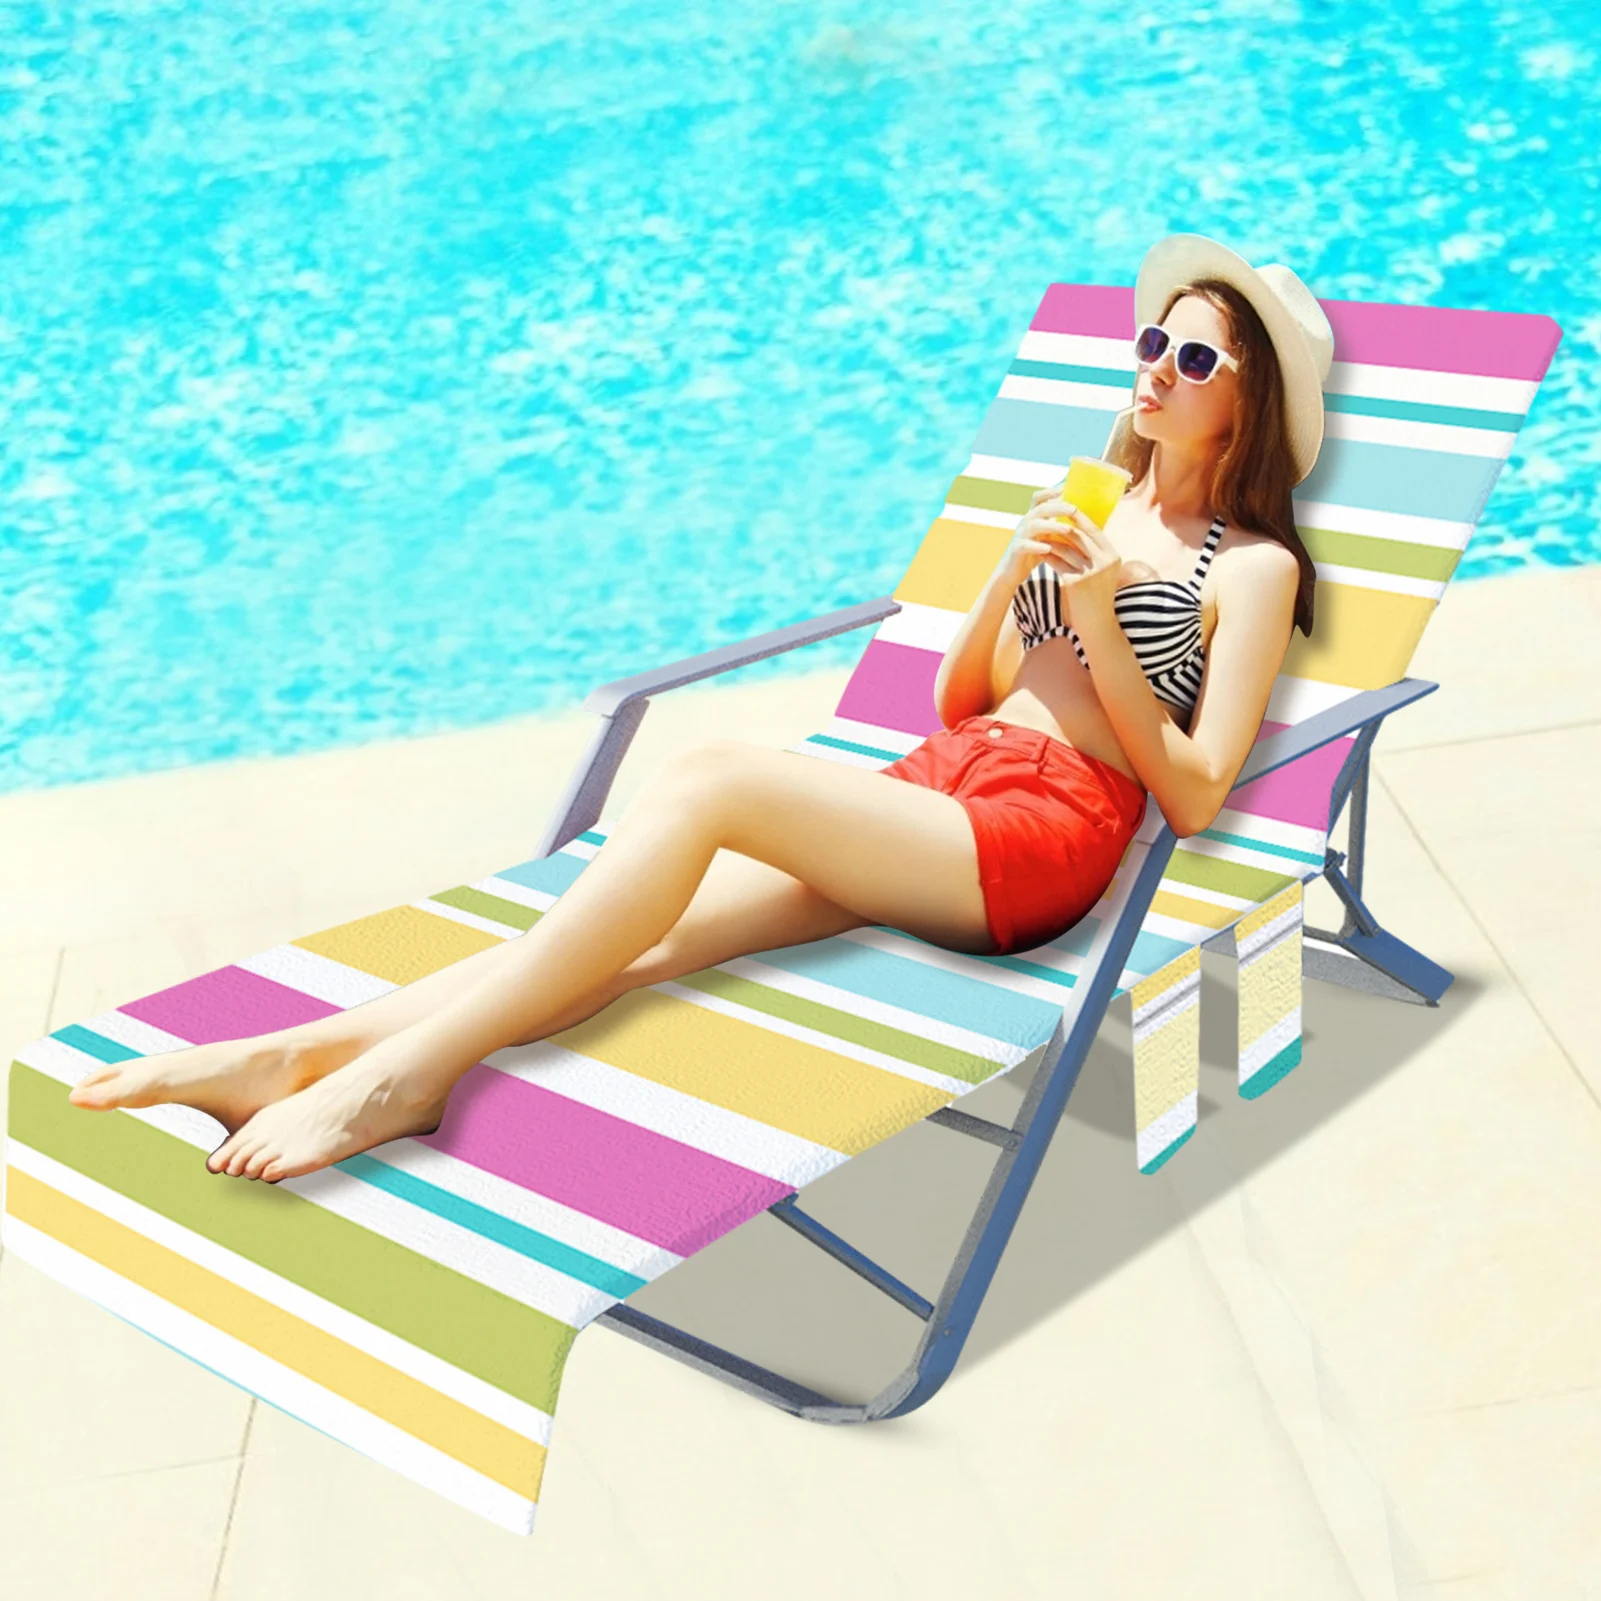 Portable Beach Chair Towel Long Strap Beach Bed Chair Towel Cover With Pocket For Summer Outdoor Garden Pool Sun Lounger Cover